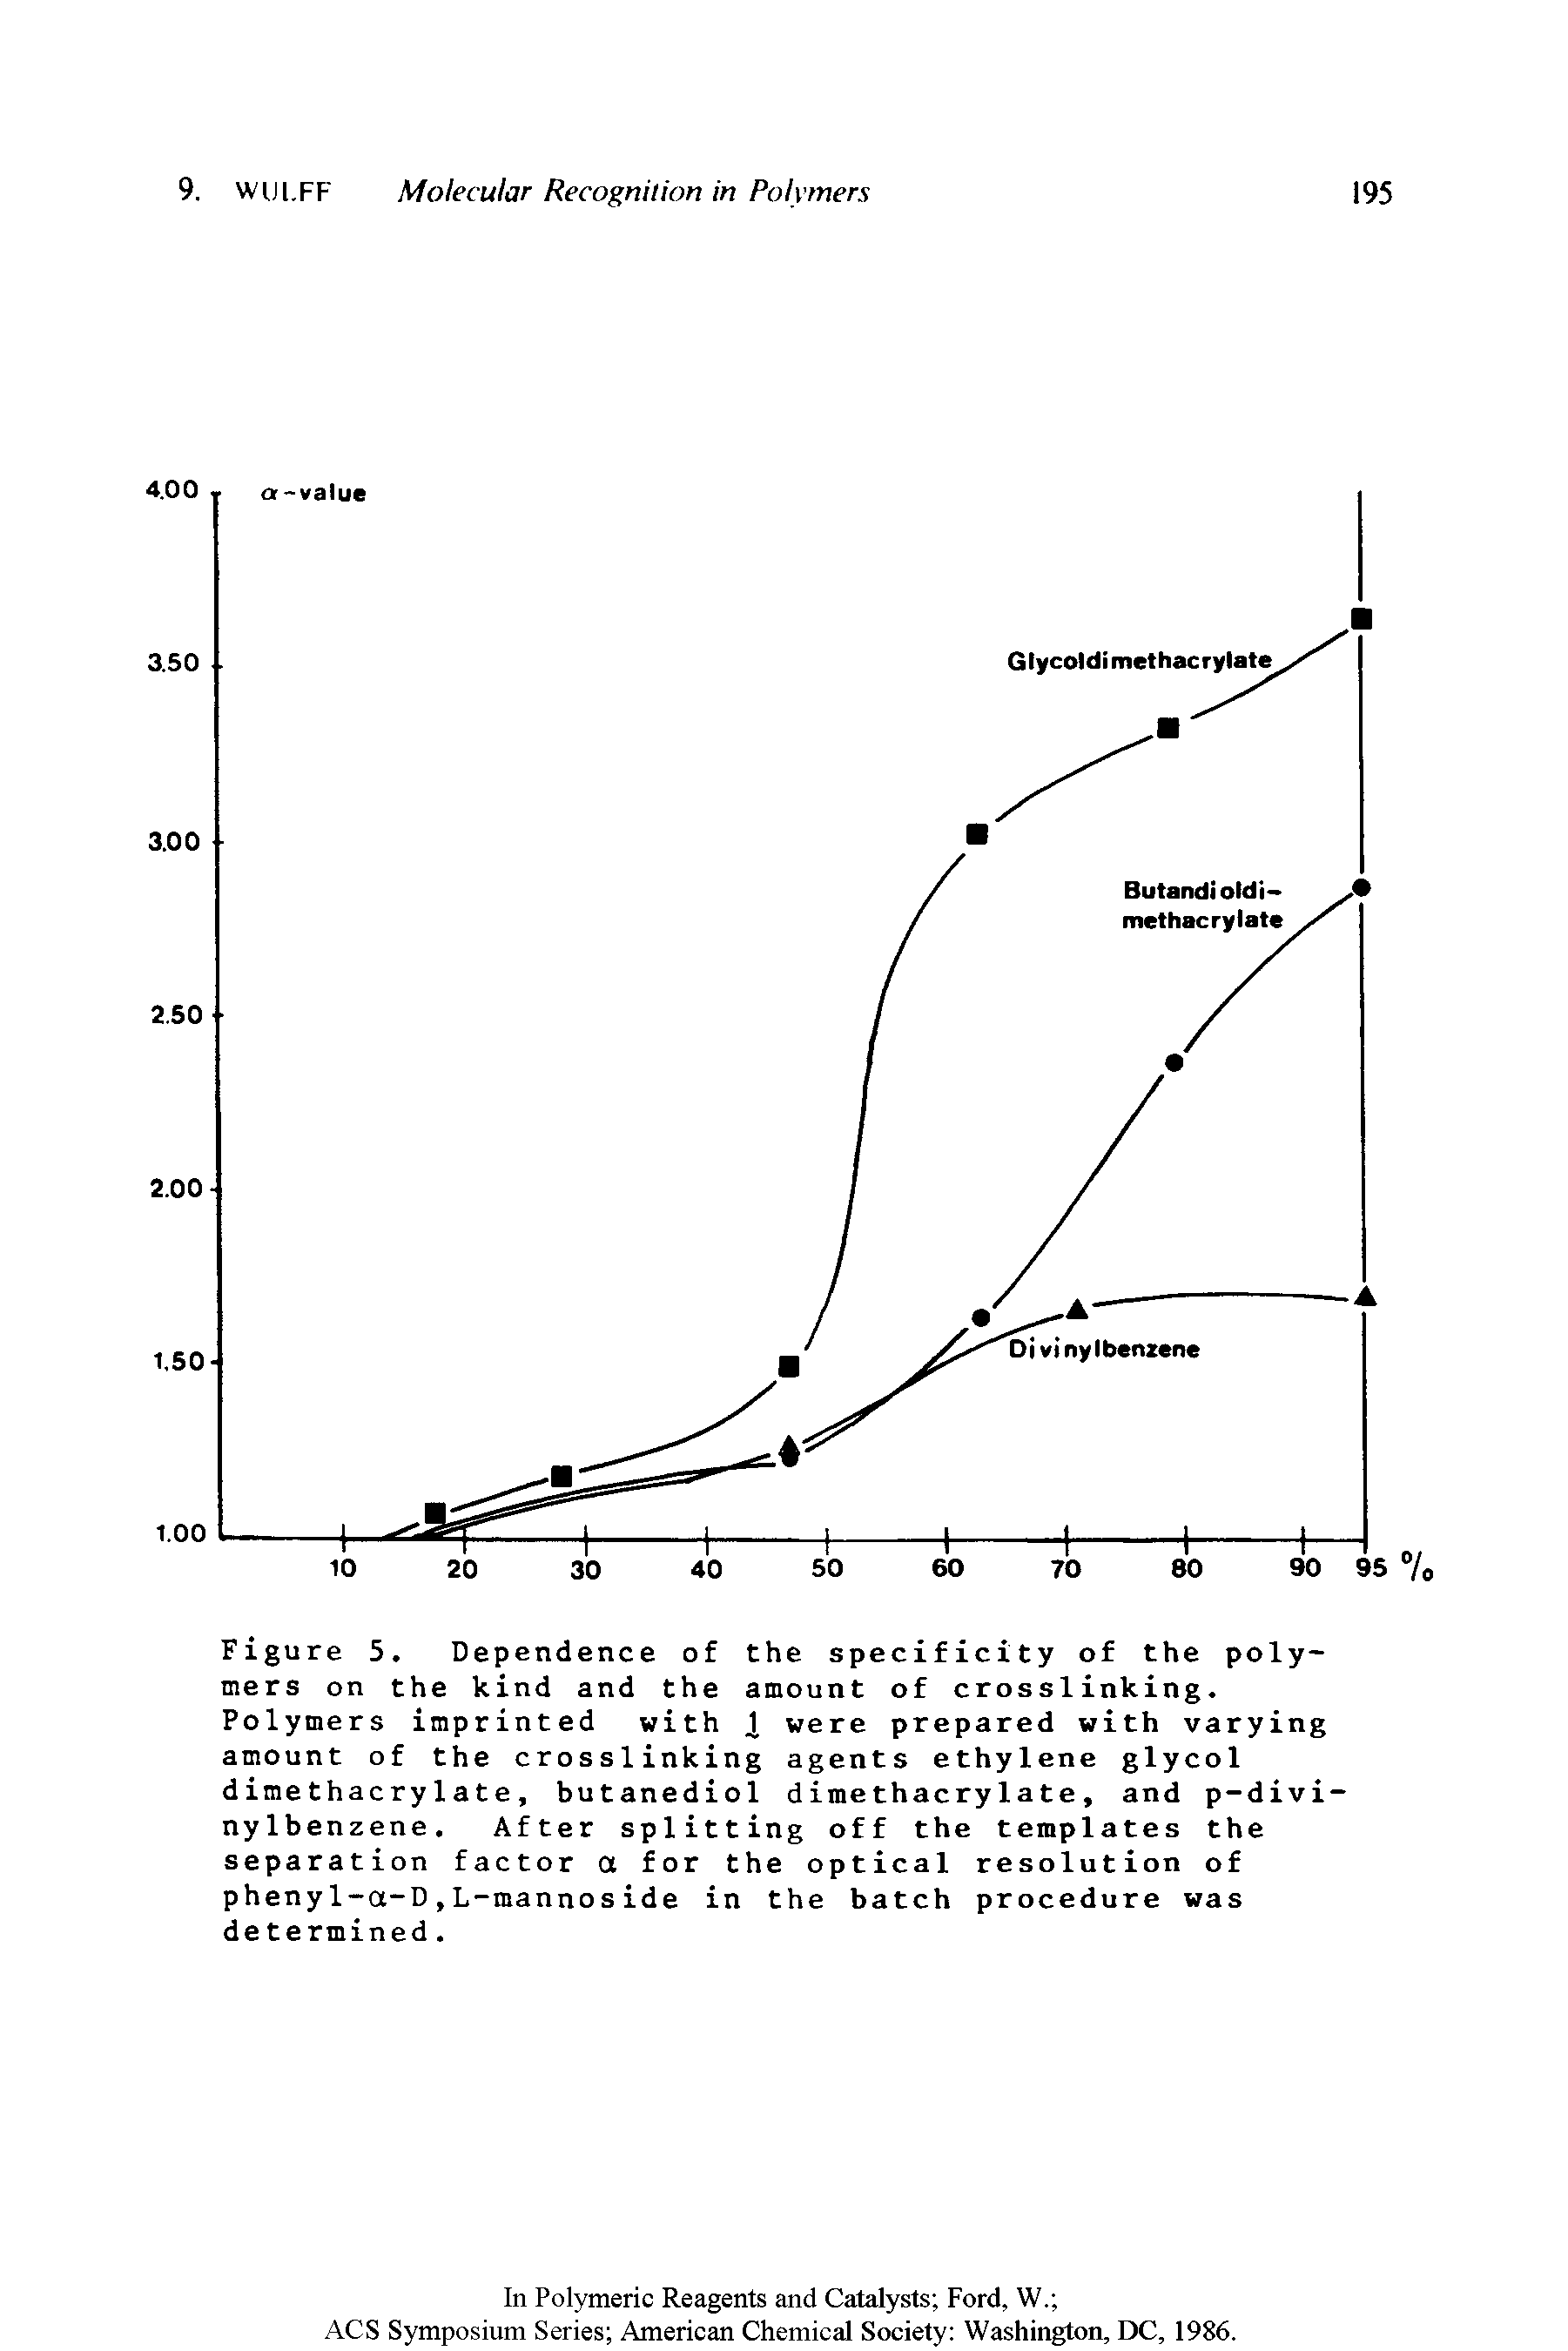 Figure 5. Dependence of the specificity of the polymers on the kind and the amount of crosslinking. Polymers imprinted with were prepared with varying amount of the crosslinking agents ethylene glycol dimethacrylate, butanediol dimethacrylate, and p-divi-nylbenzene. After splitting off the templates the separation factor a for the optical resolution of phenyl-a-D,L-mannoside in the batch procedure was determined.